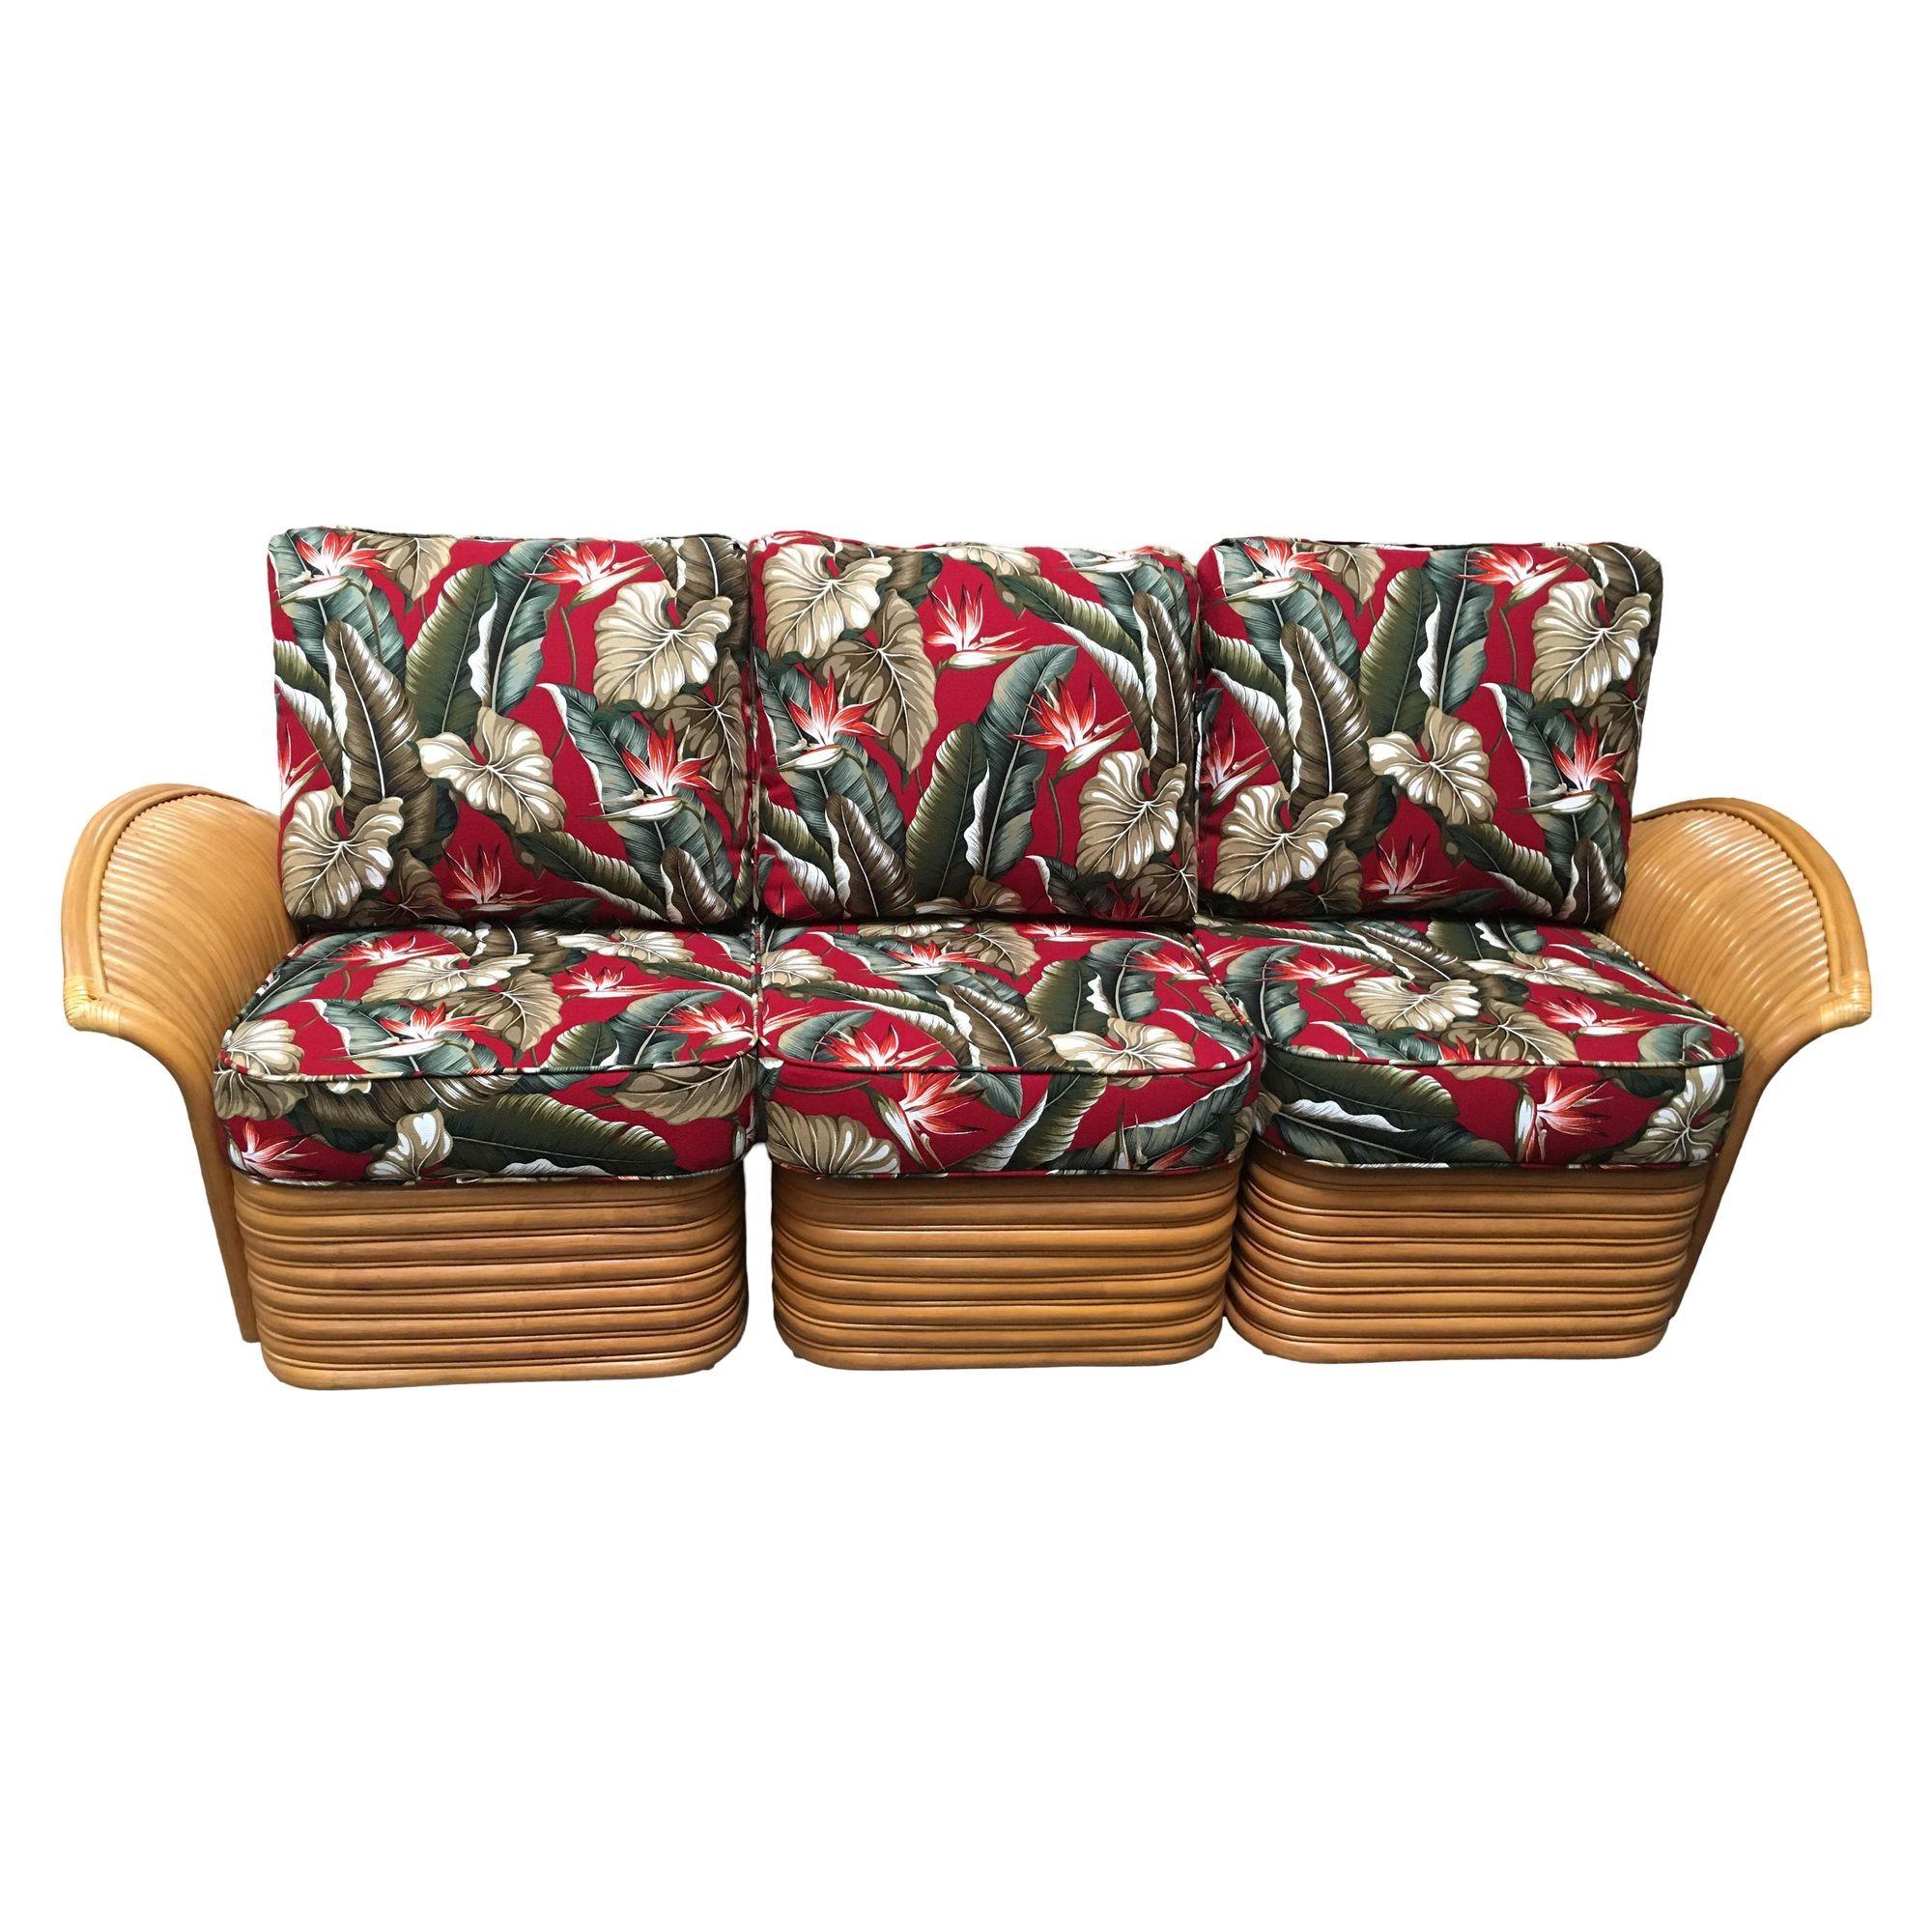 Harveys Collection features the famous Mid-Century fan arm 3 seater sectional sofa. The sofa features beautifully shaped fan arms with a stacked rattan base.

1990, United States

Sofa dimensions = 34